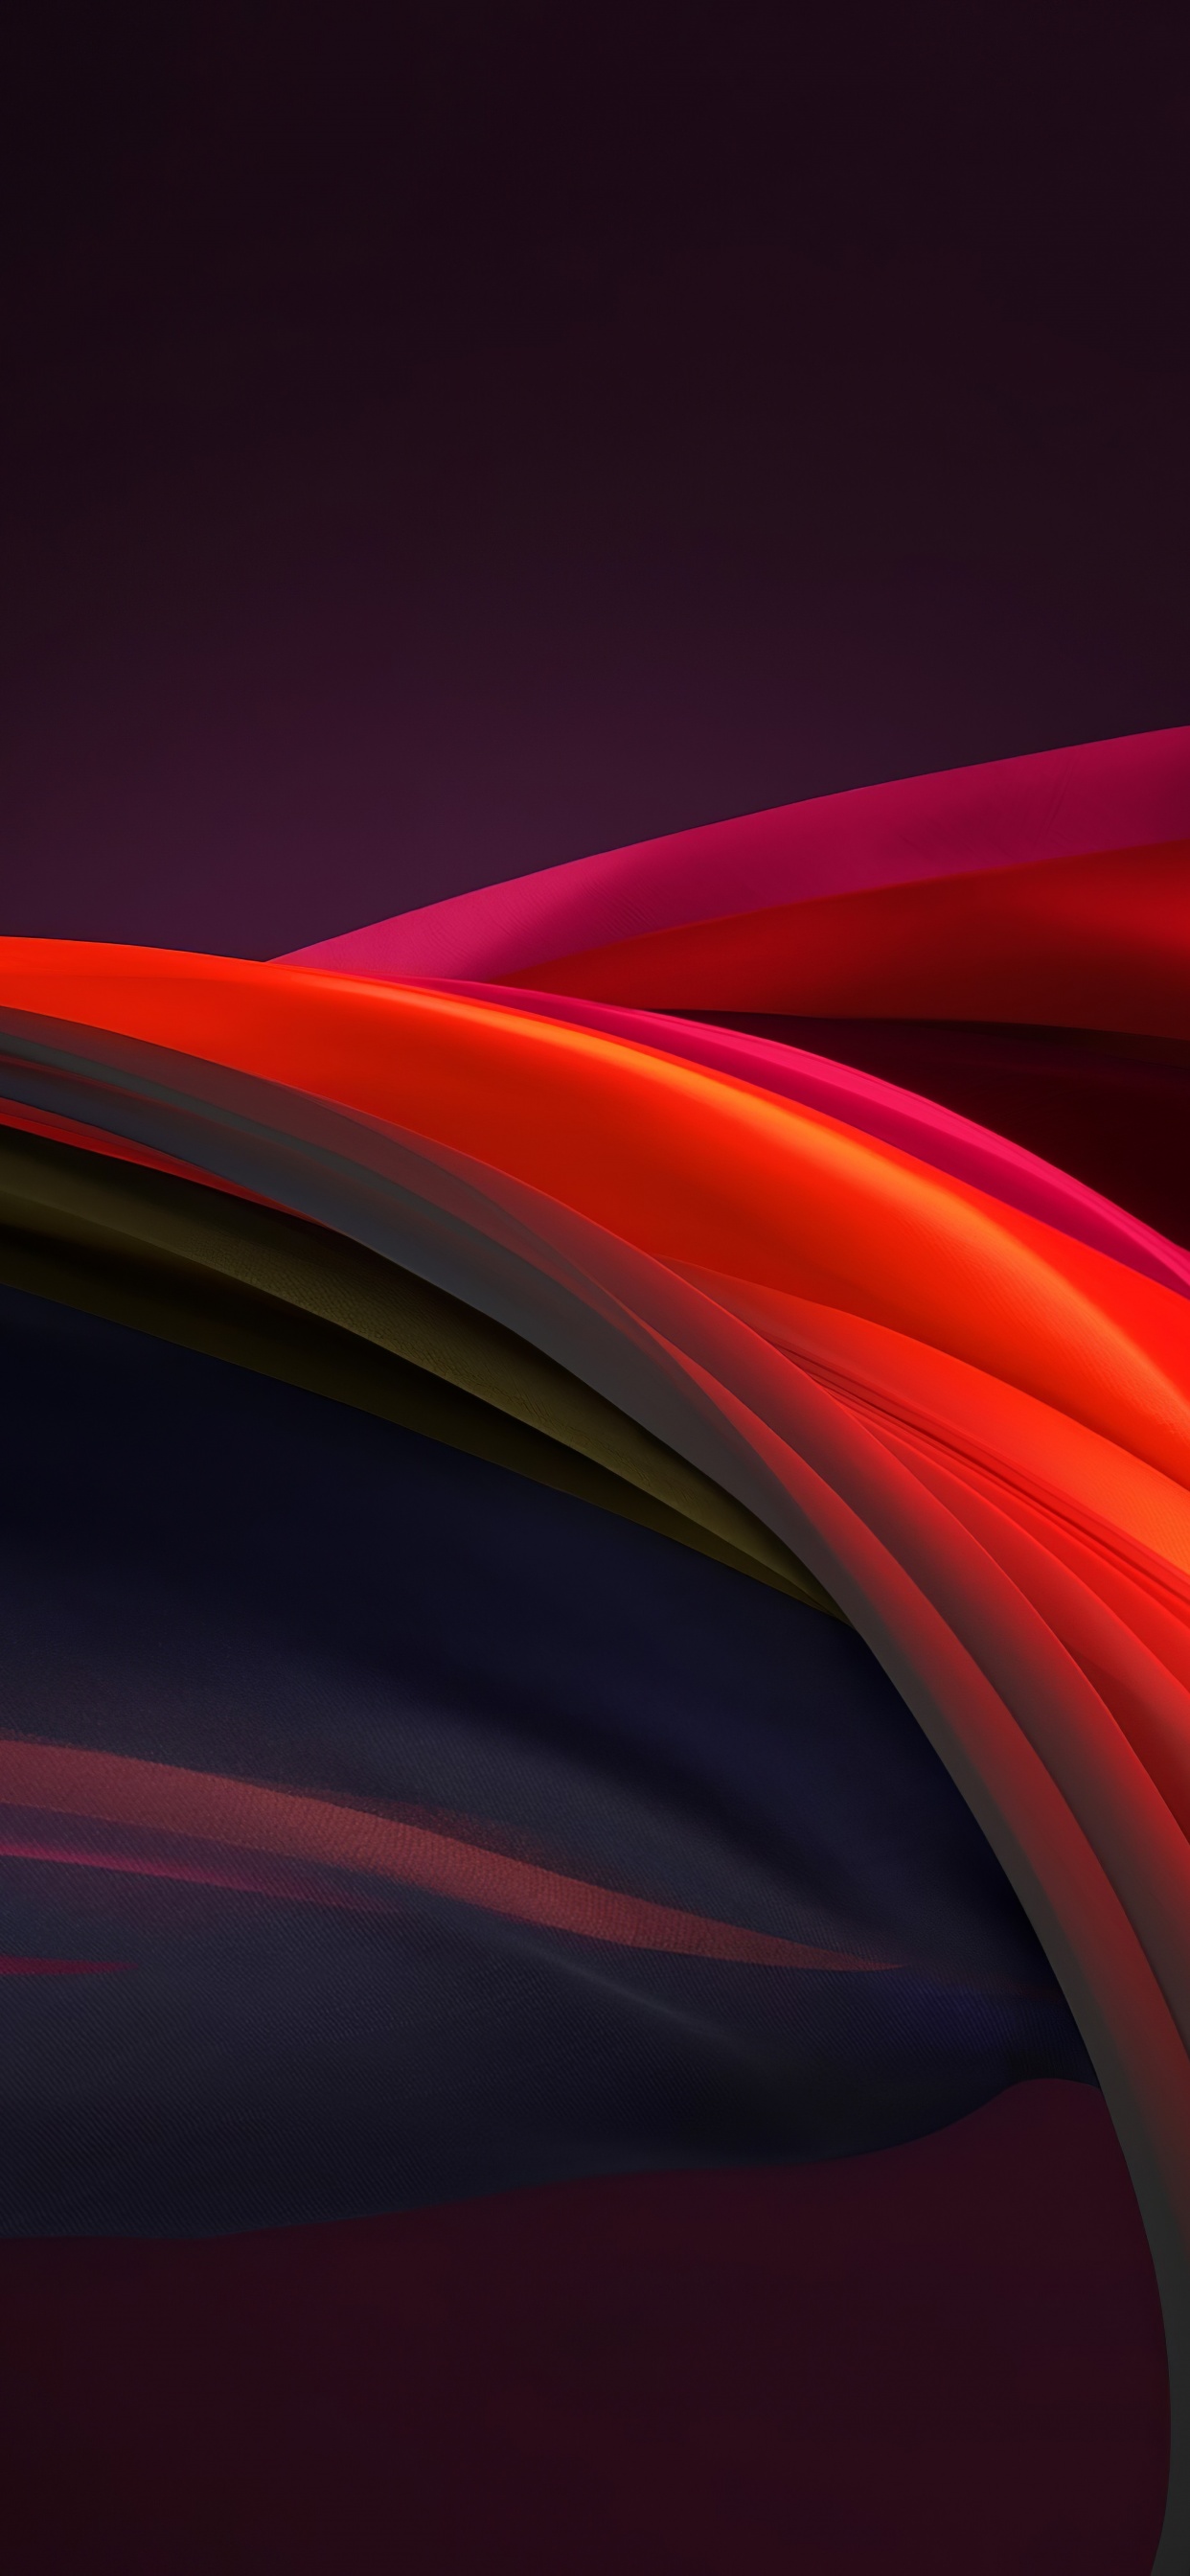 Abstract 4k Wallpapers & 3D Graphics in HD, 8k resolution  Iphone wallpaper,  Abstract iphone wallpaper, 4k wallpaper iphone